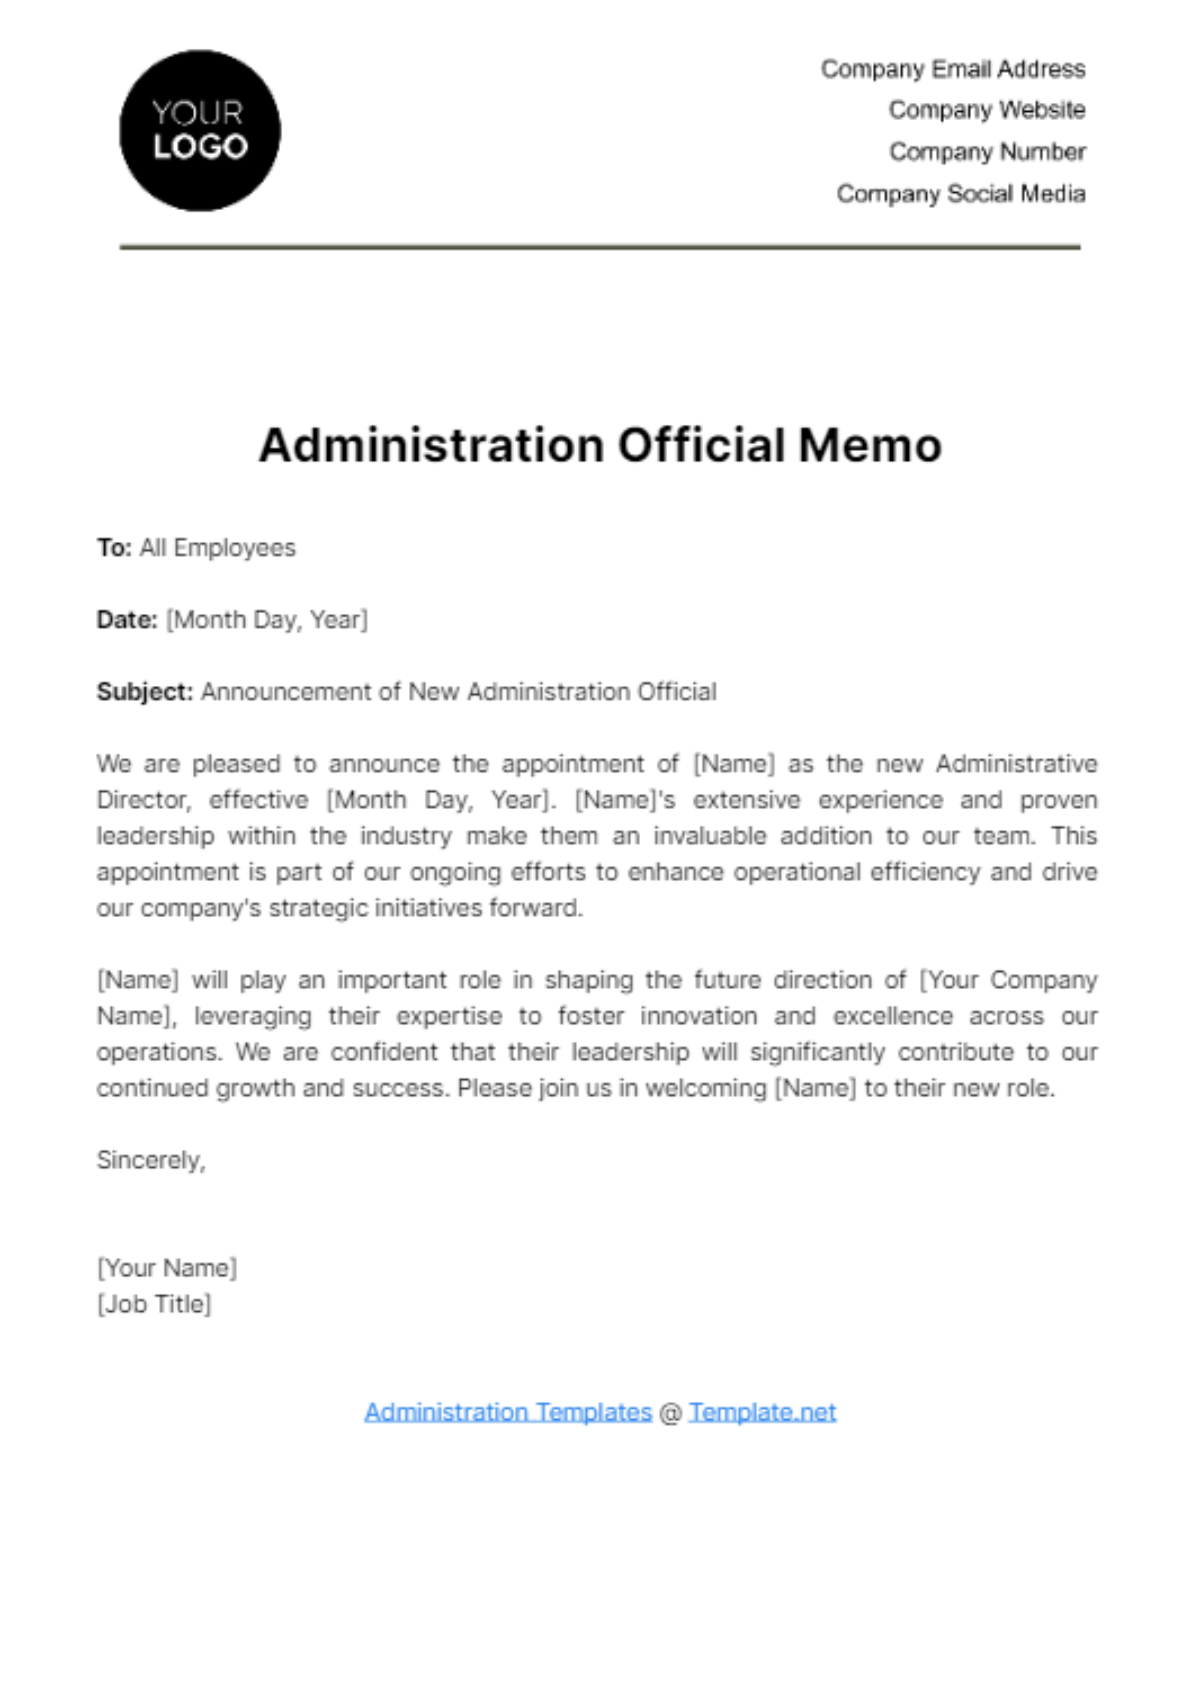 Administration Official Memo Template